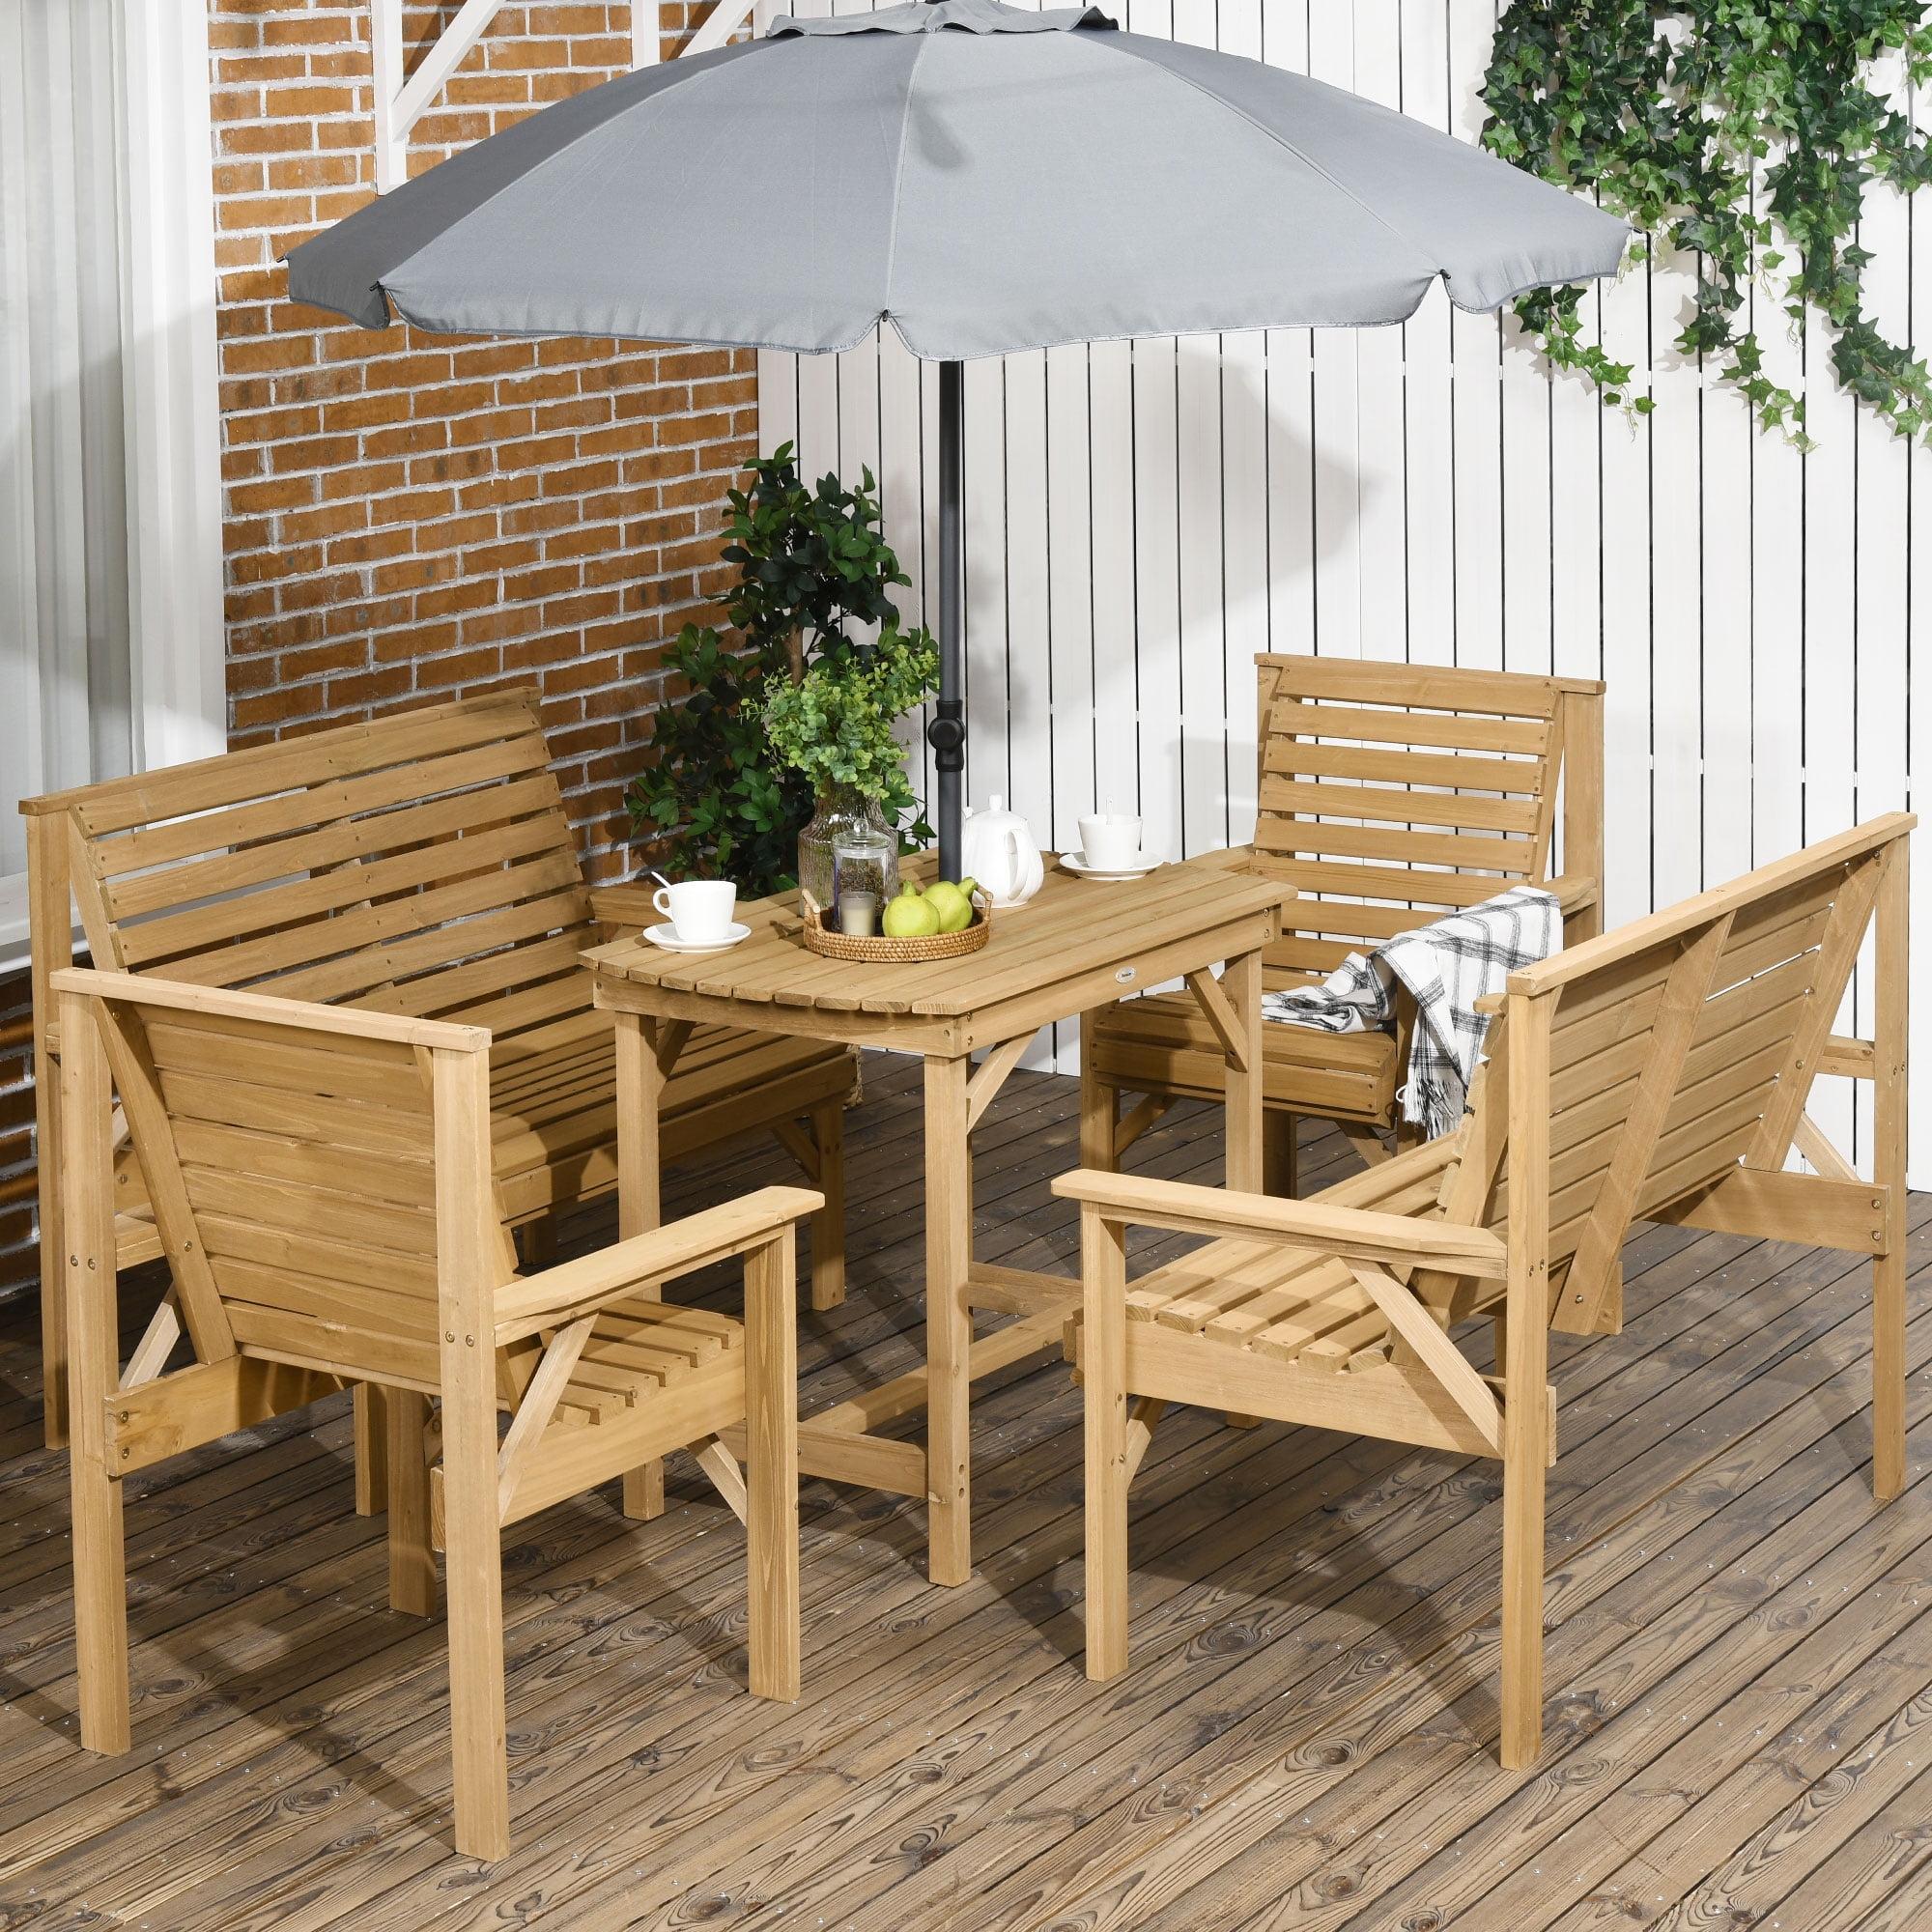 Outsunny 5 Piece Light Brown Wood Patio Dining Set